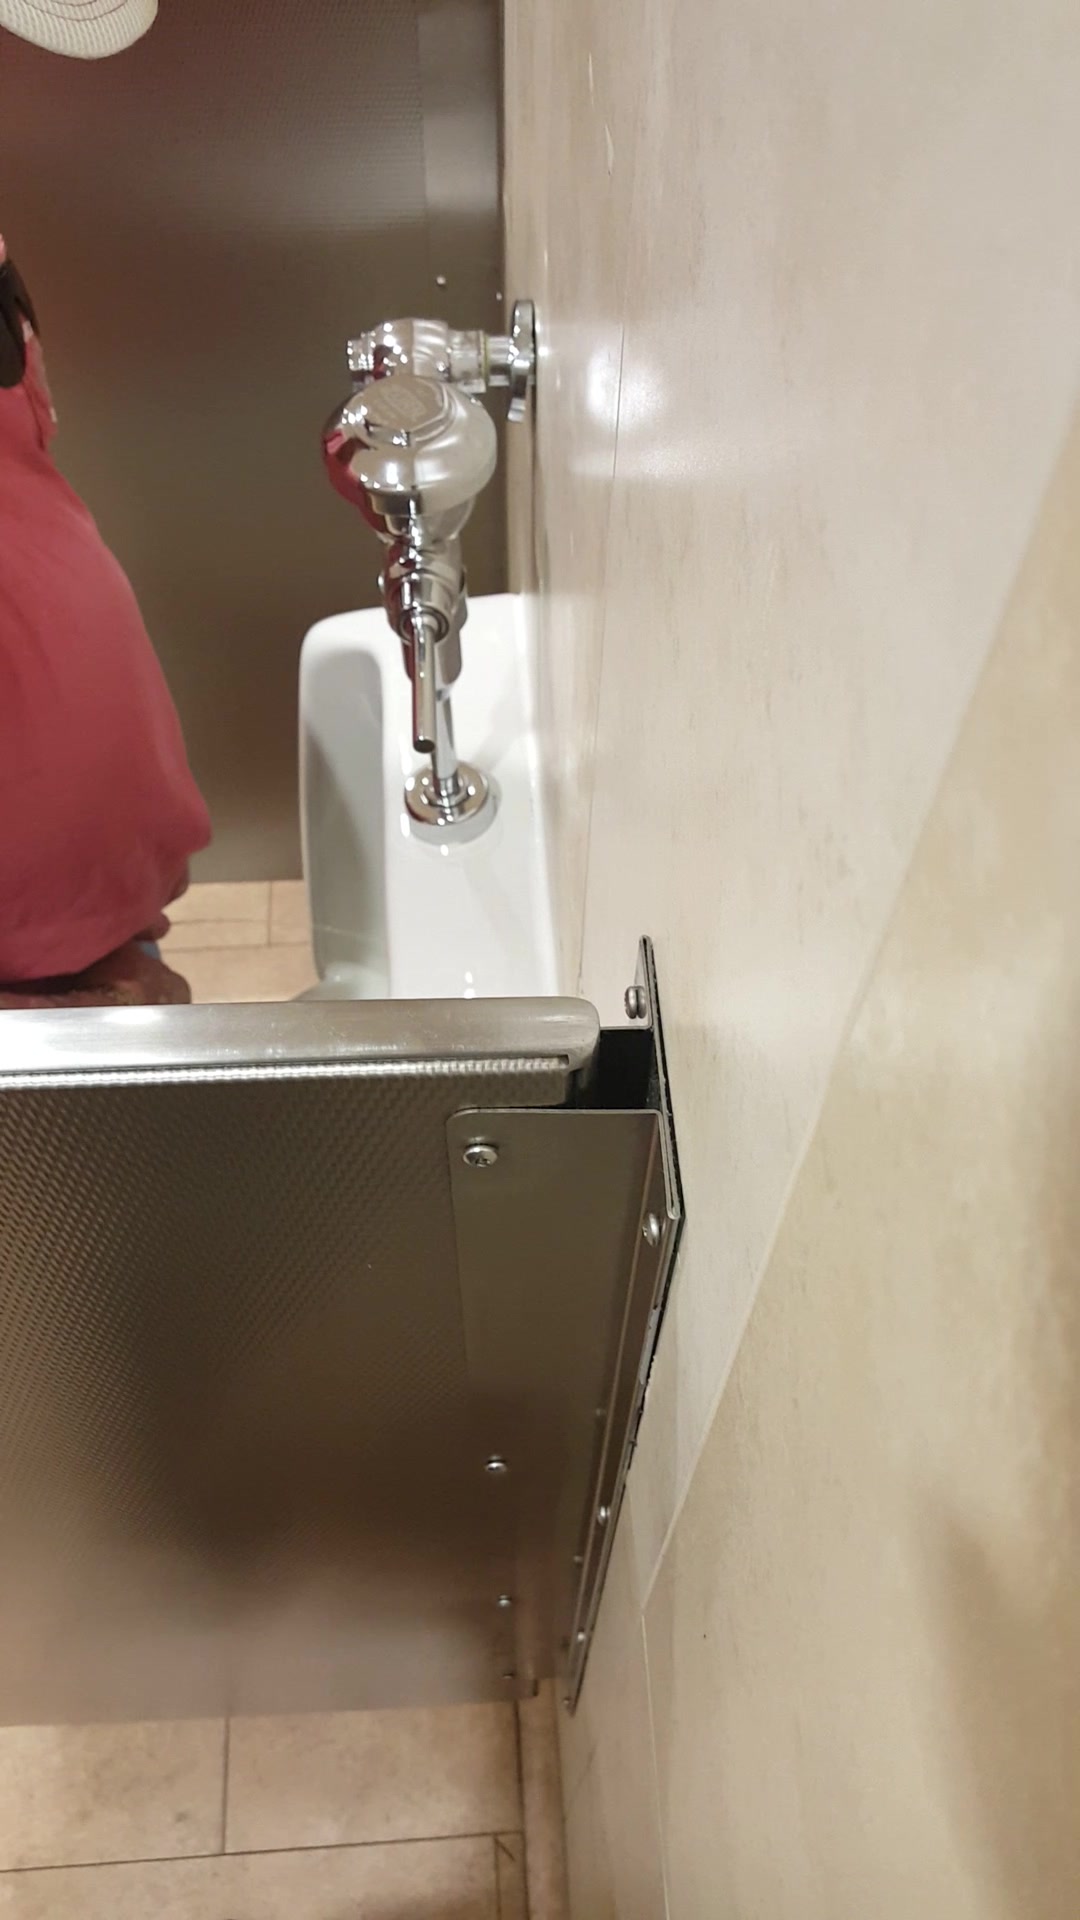 2nd Successful Urinal Spy Attempt